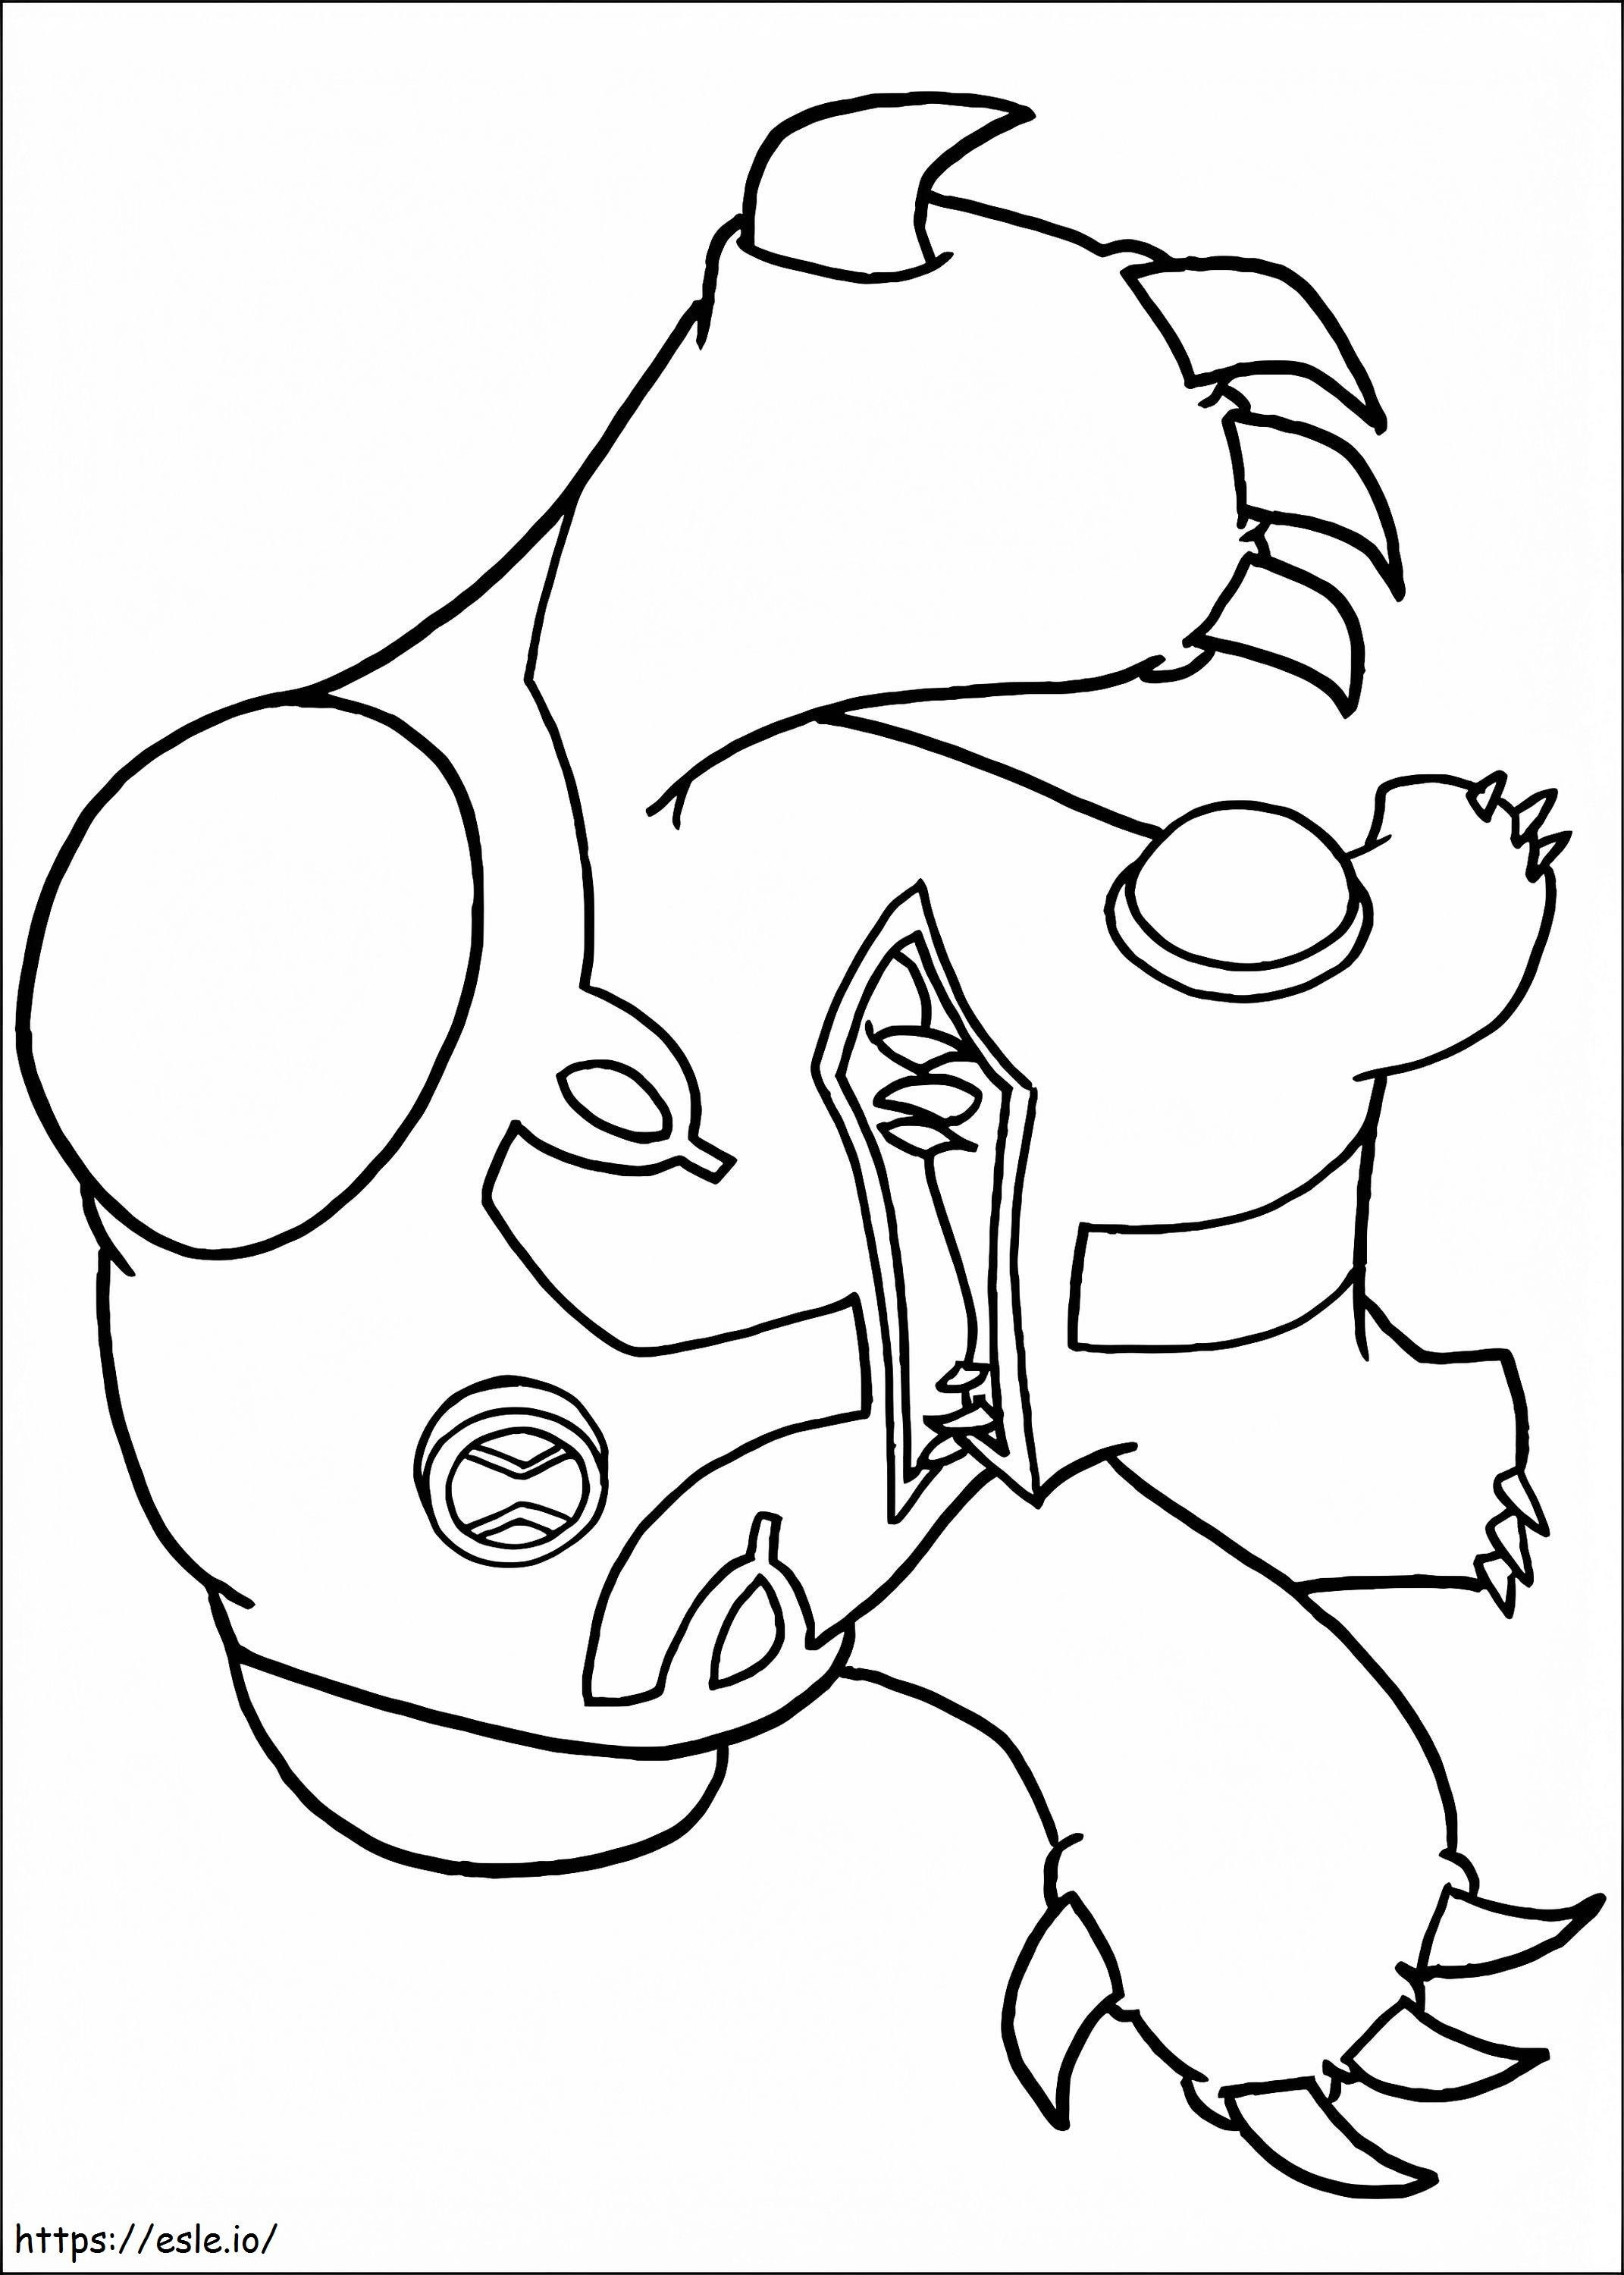 1533867123 Angry Cannonbolt A4 coloring page